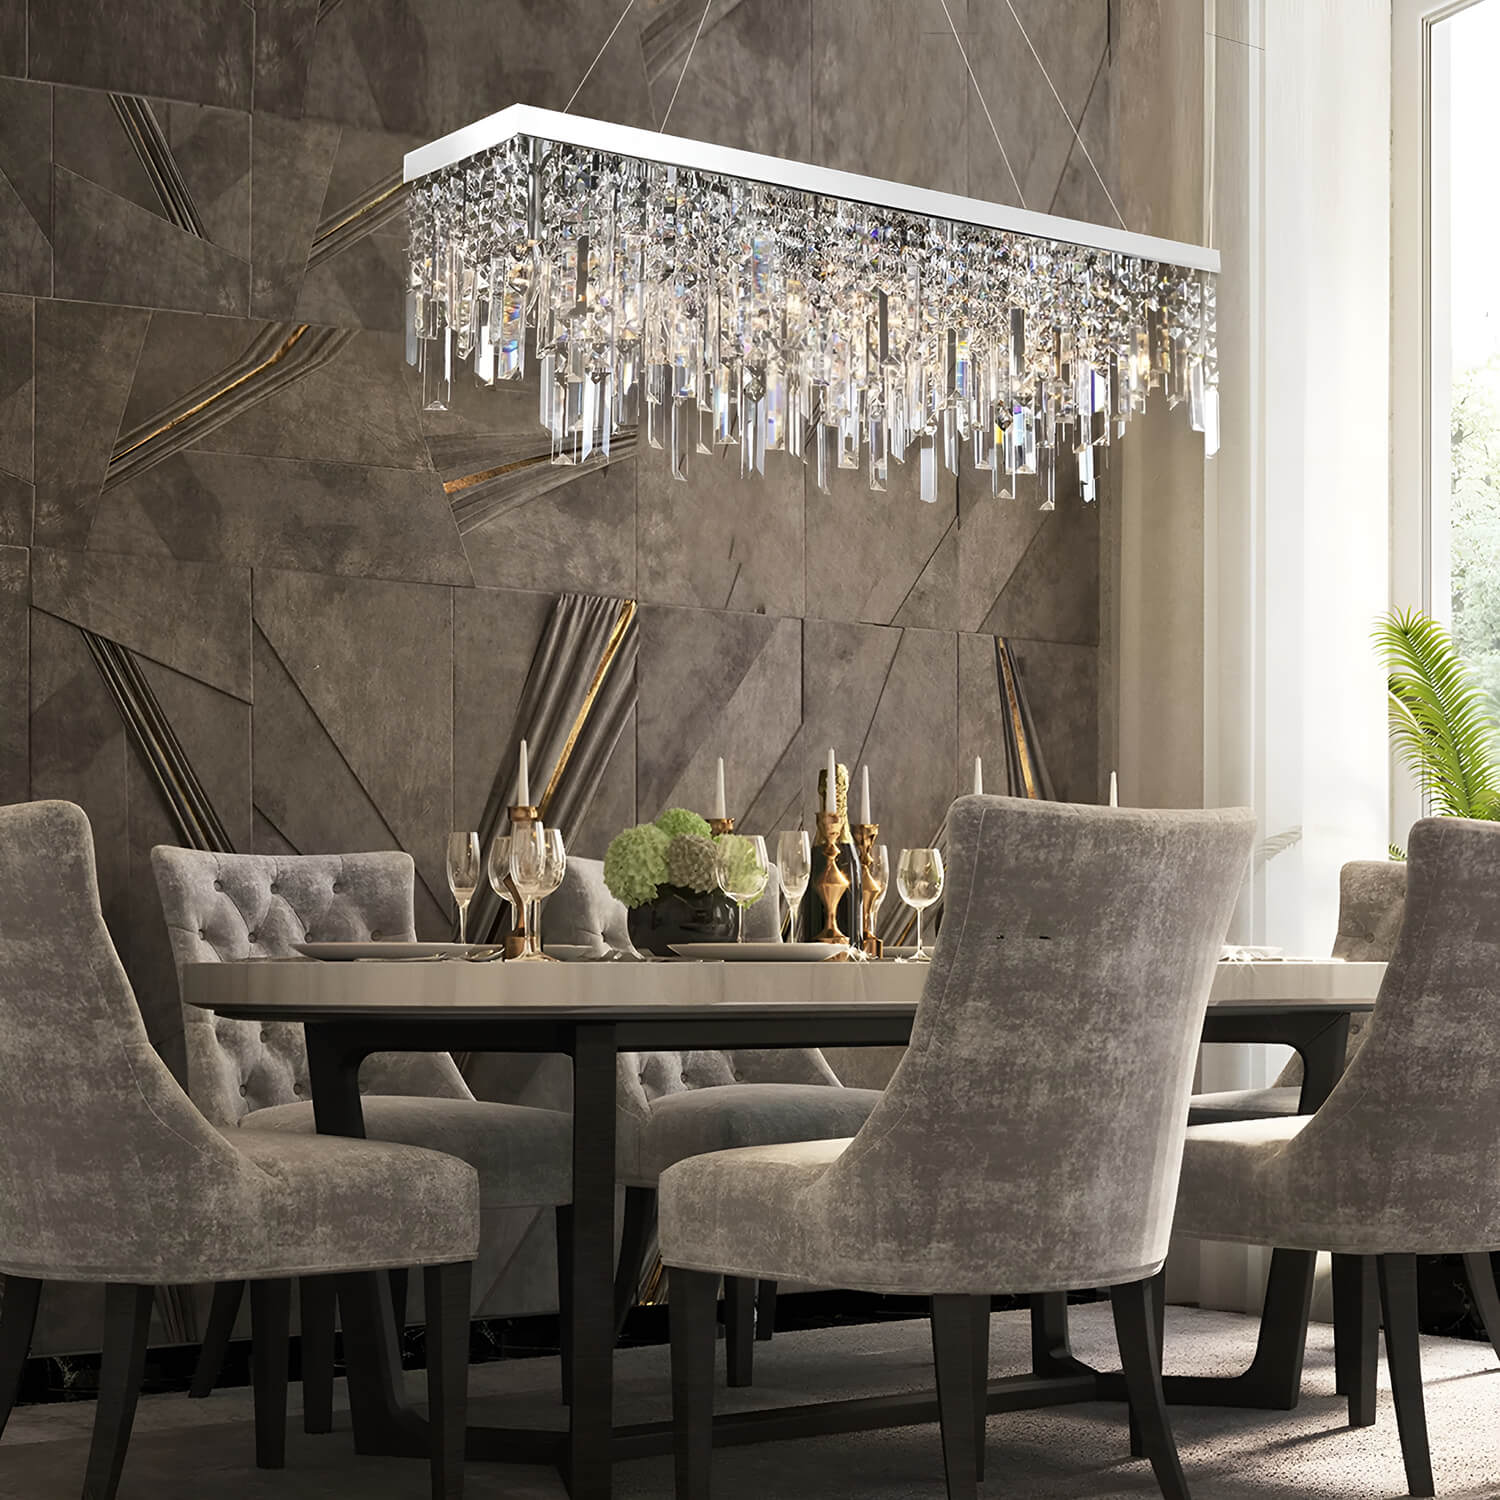 Rectangular Crystal Chandelier With Linear Design - Dining Room-1|Sofary